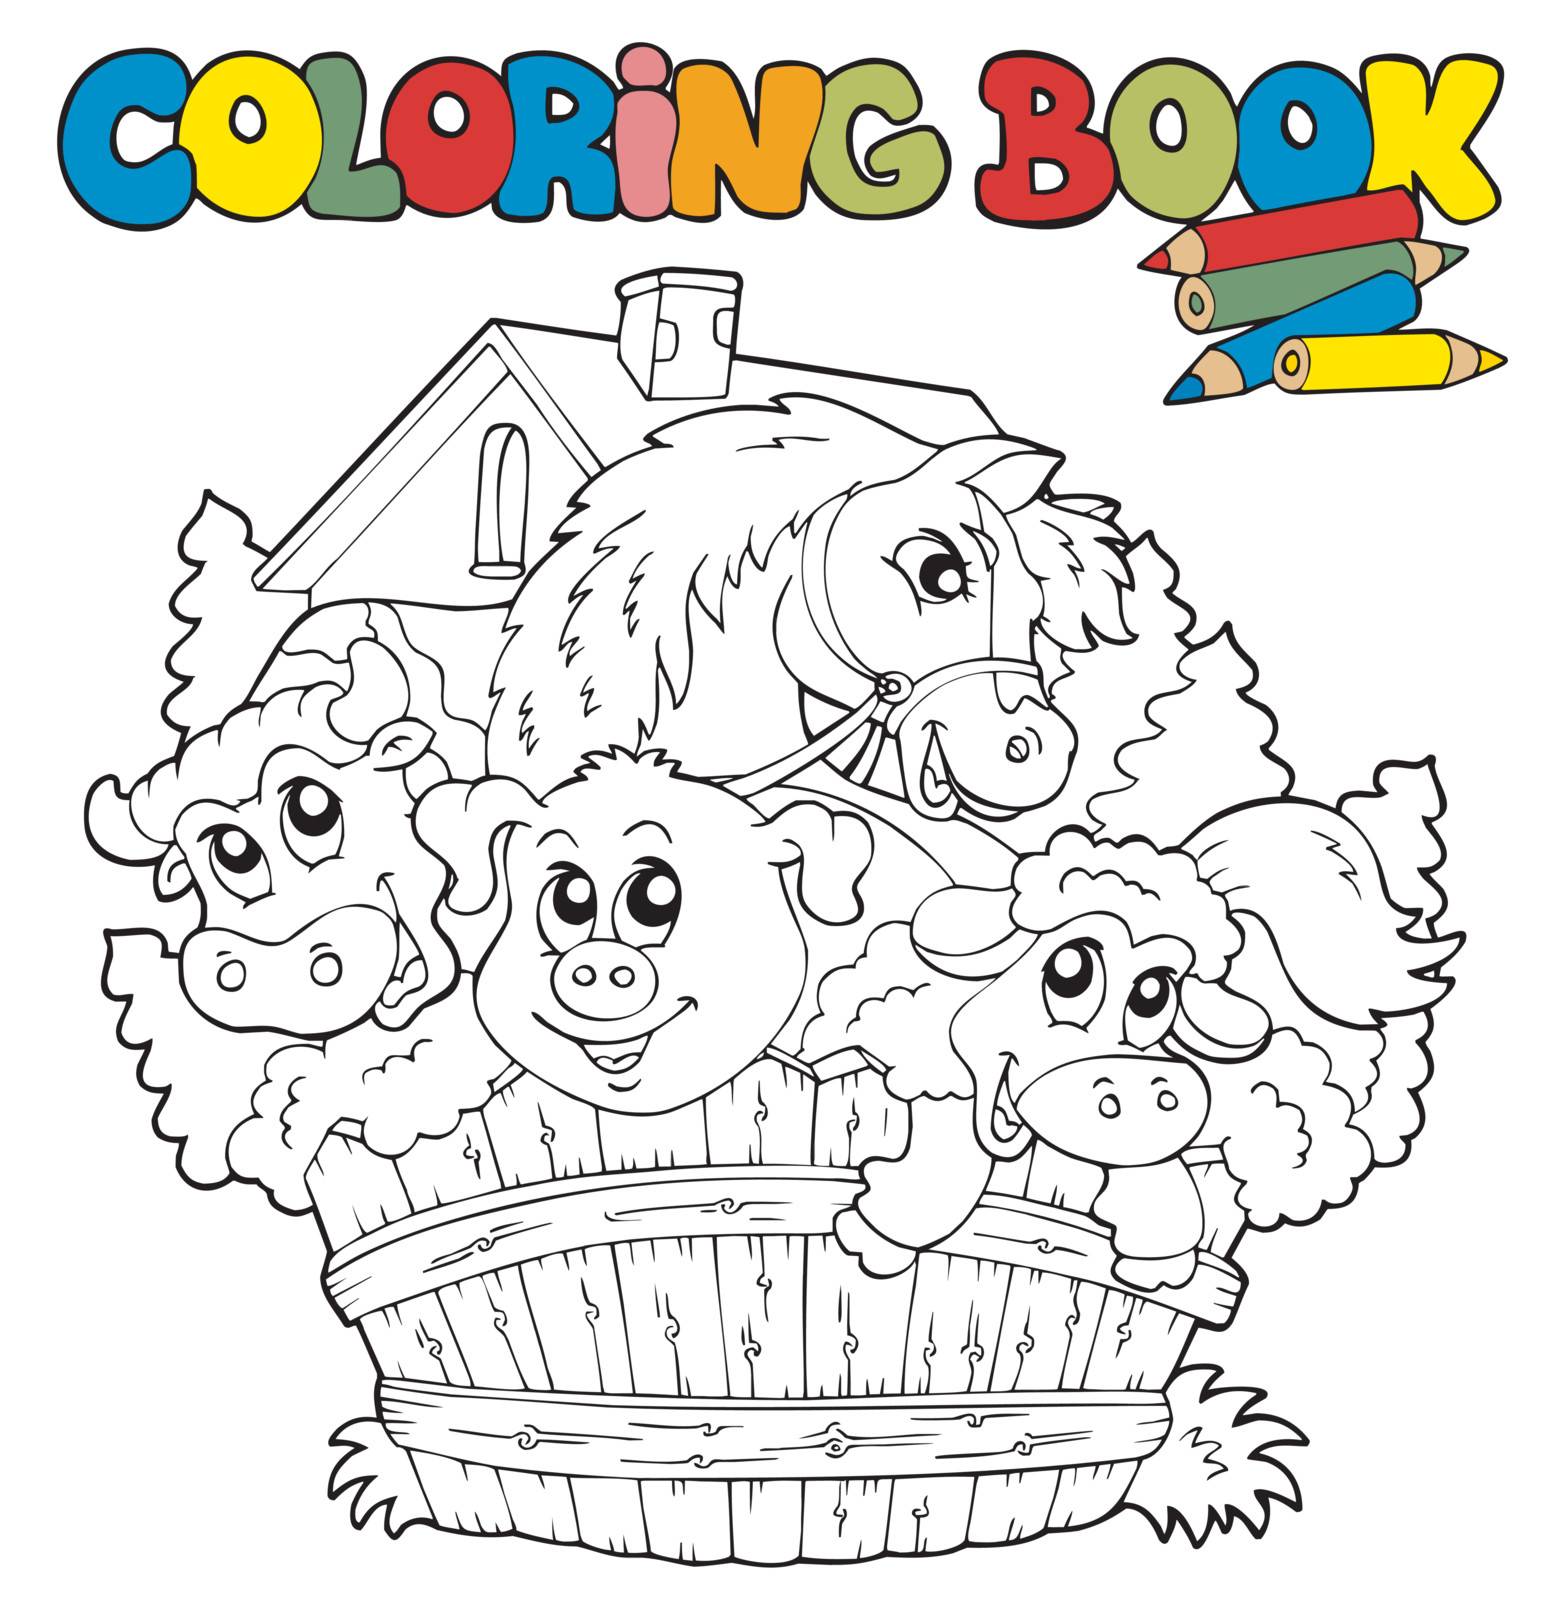 Coloring book with cute animals 2 by clairev